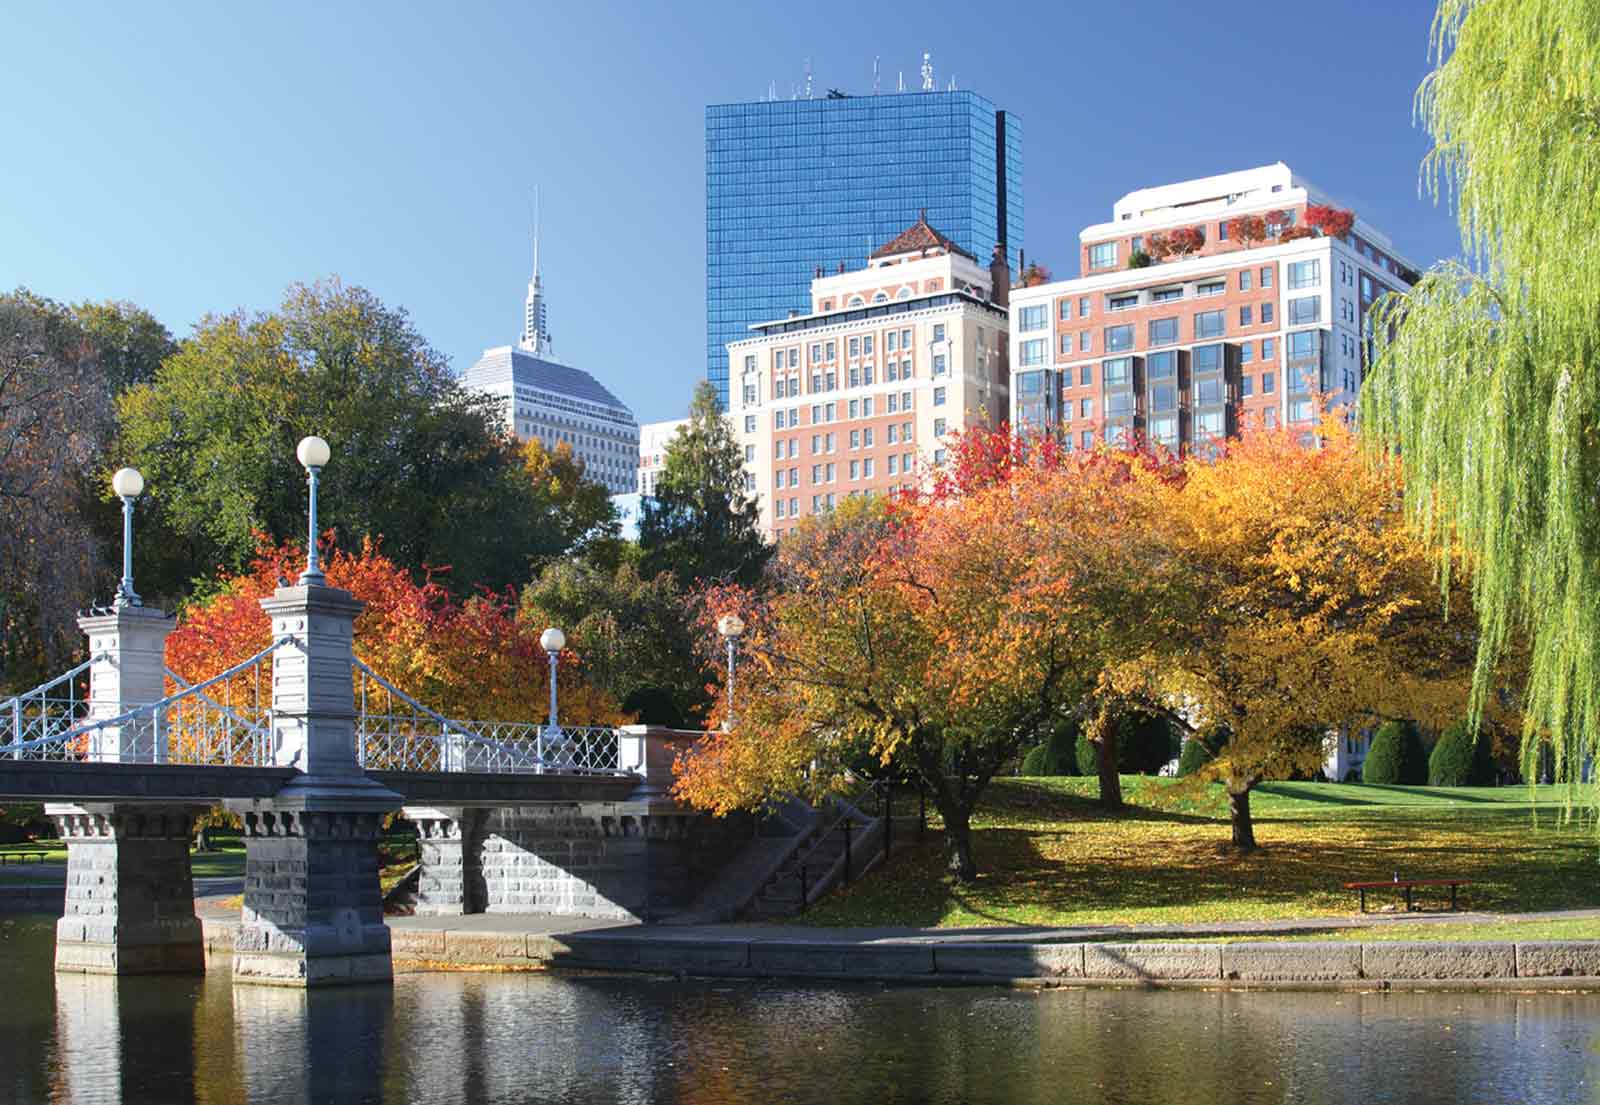 View of Boston buildings from the Boston Common